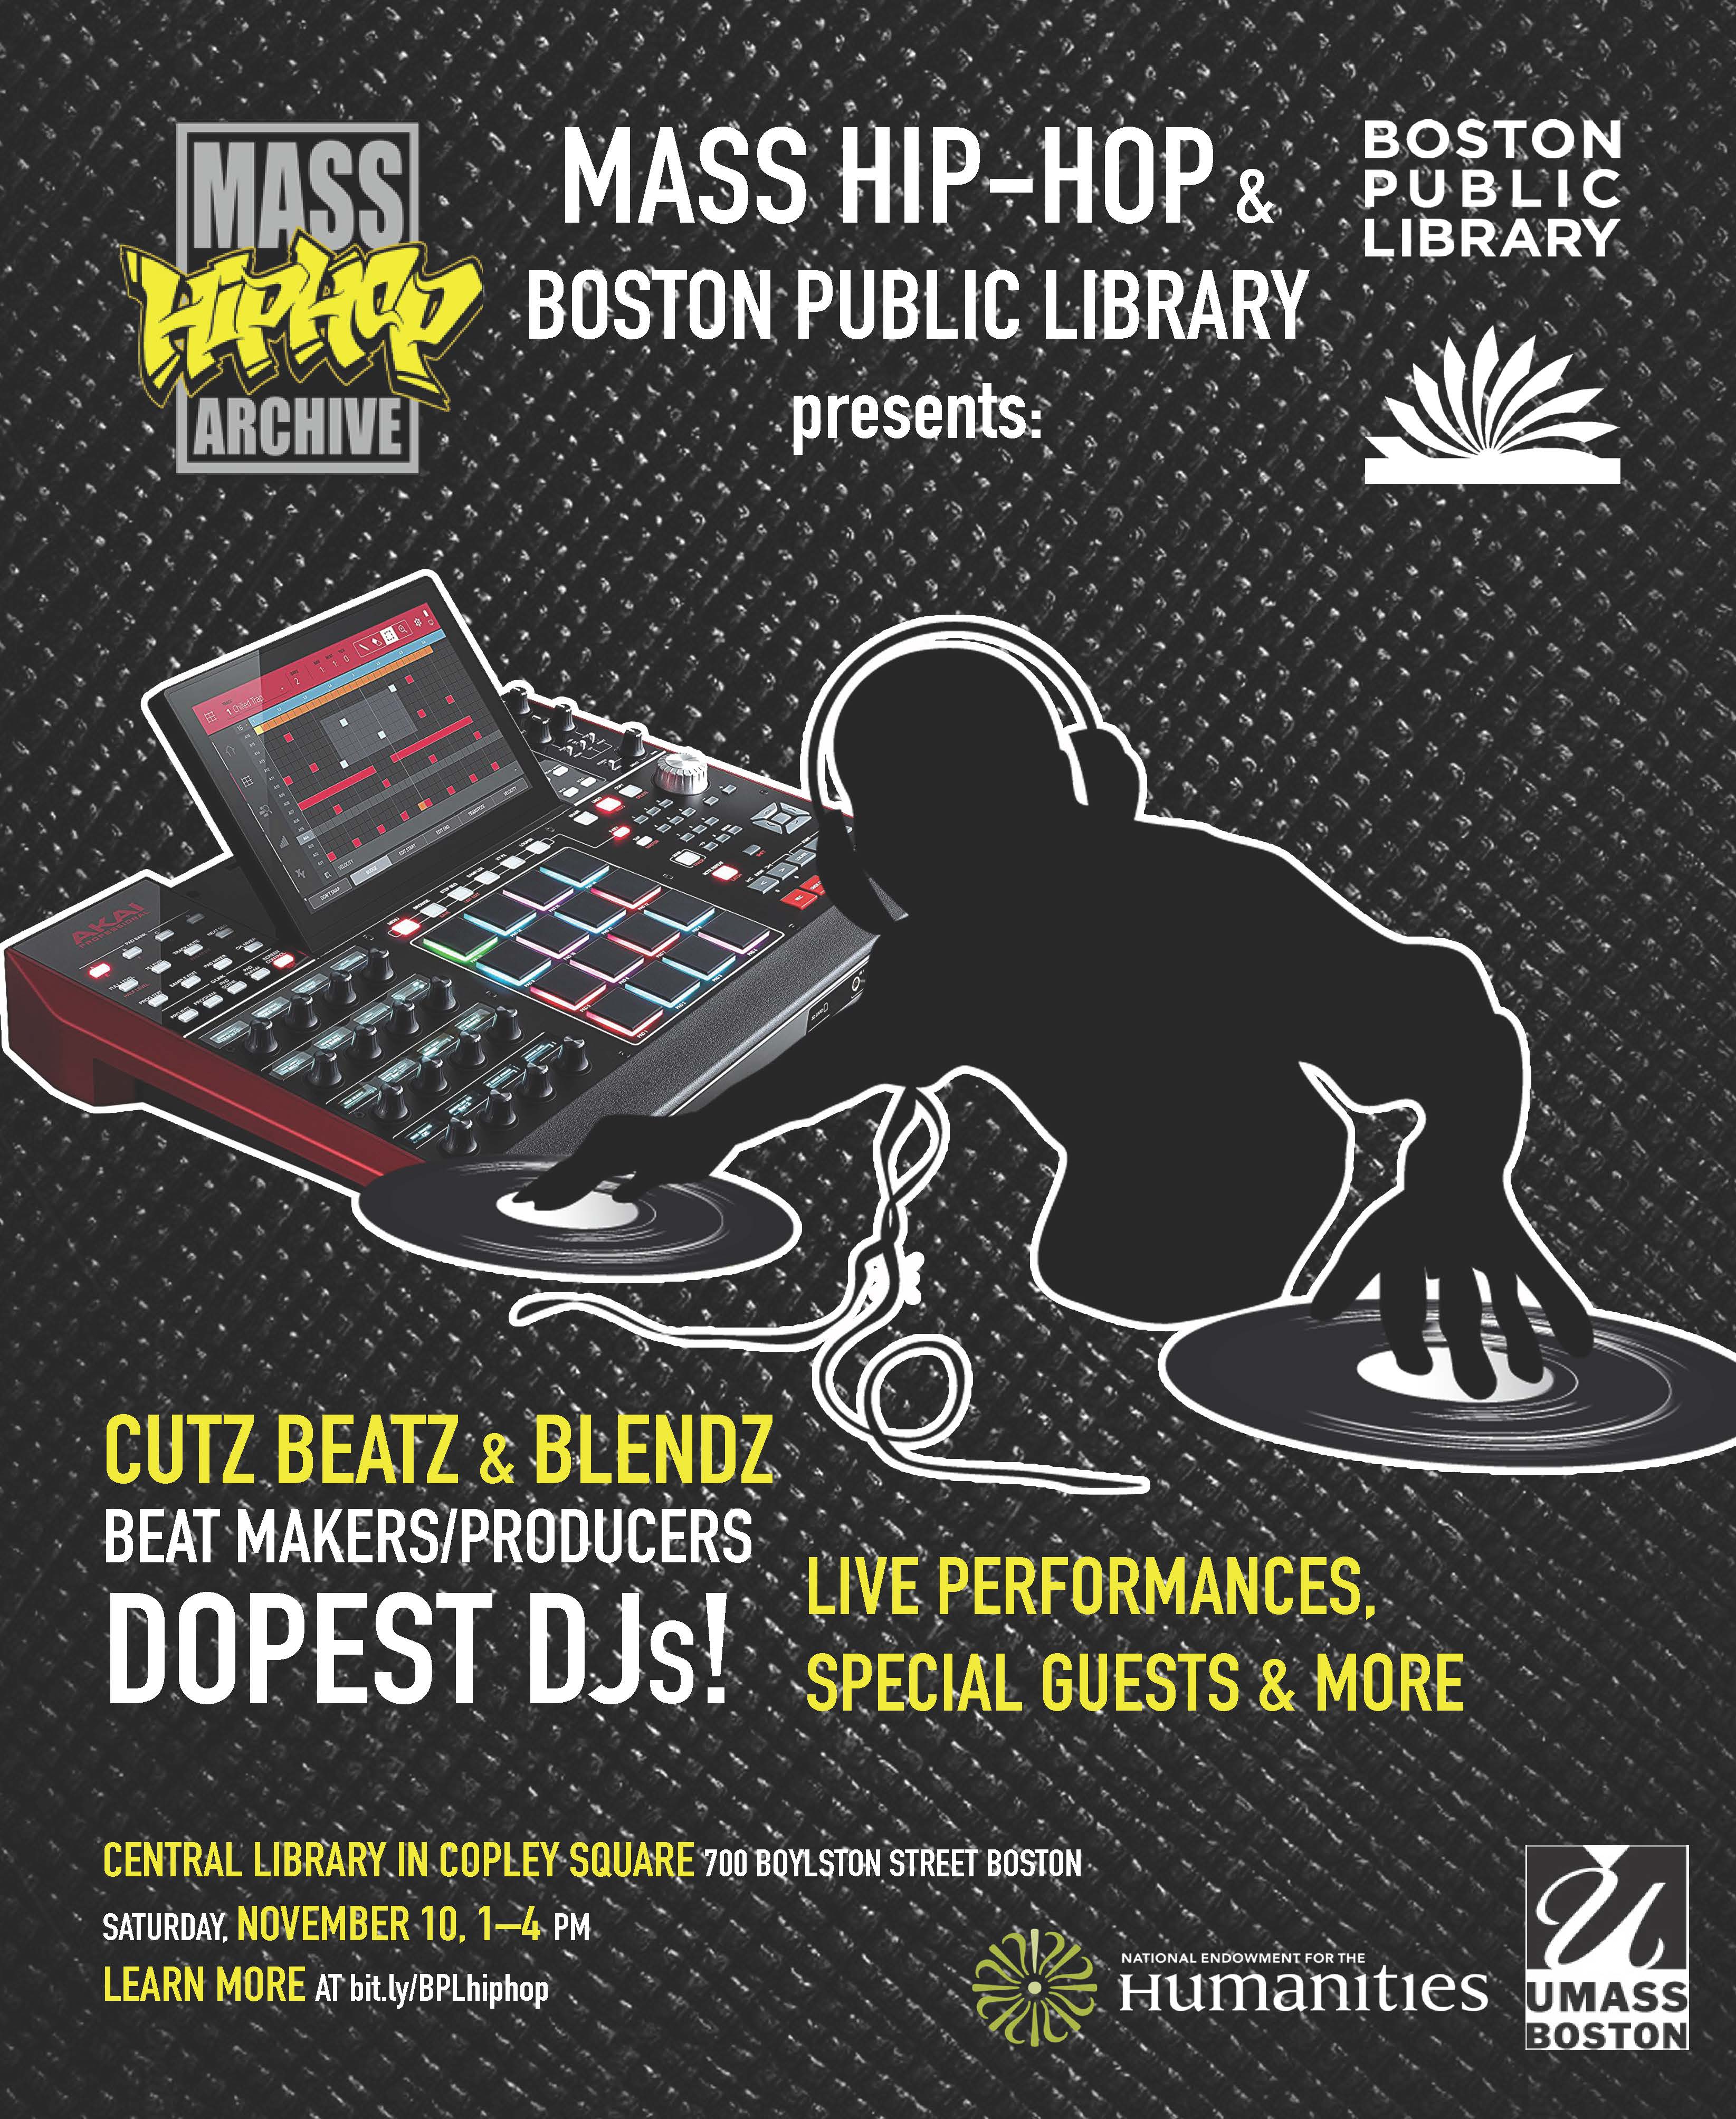 Flyer for hip-hop event at the Boston Public Library, graphic shows outline of DJ as sound board.